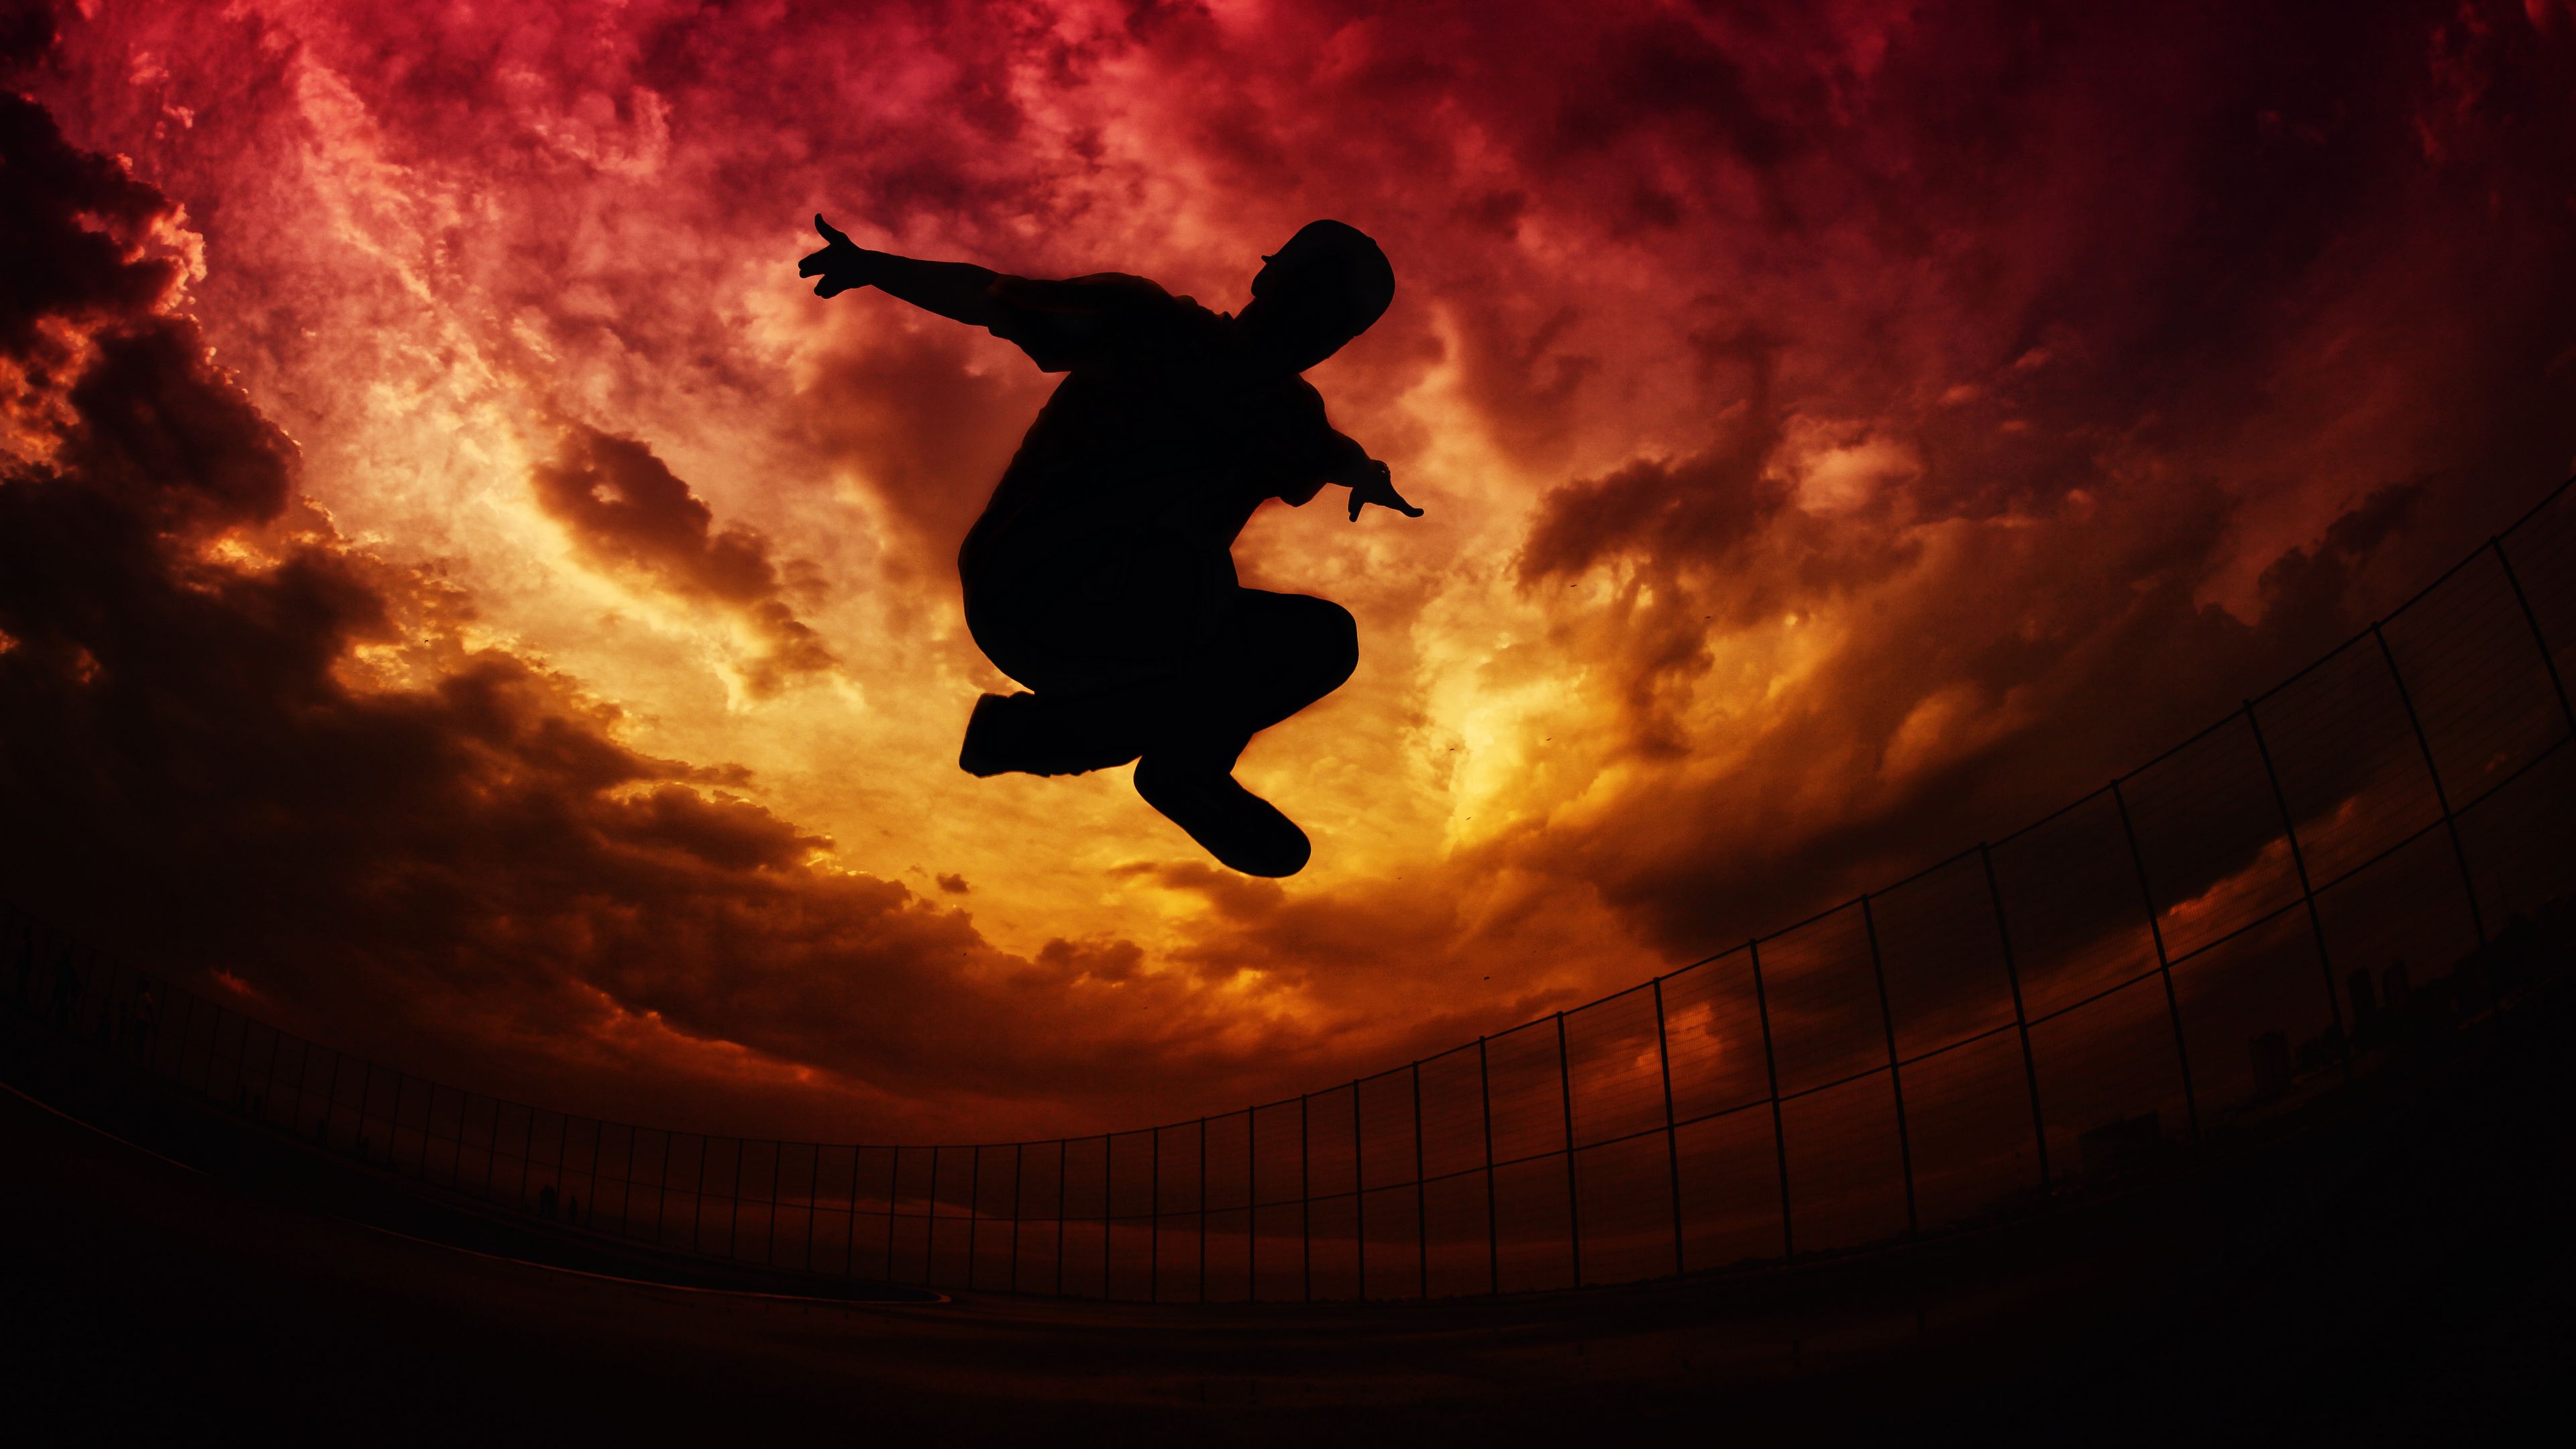 Download wallpaper 3840x2160 parkour, silhouette, jump, sky, clouds, fence 4k  uhd 16:9 hd background